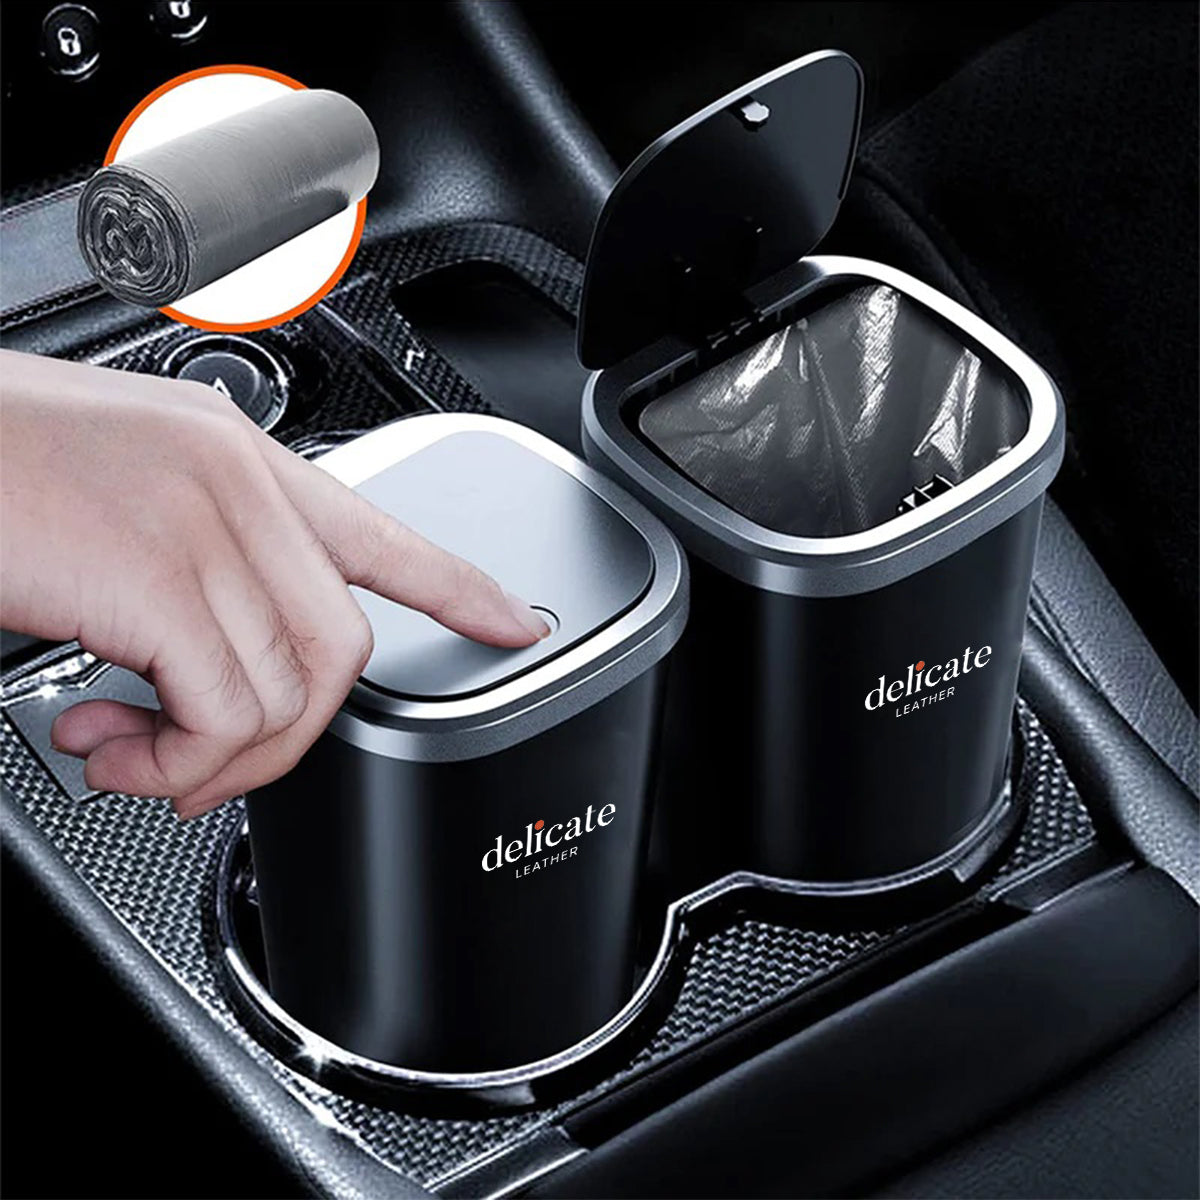 Car Trash Cans, Custom For Your Cars, Compact & Durable Car Accessories for Interior Use 2 Pack, Practical Car Organizers and Storage Cups with Pop-Up Open, Car Accessories MC11993 - Delicate Leather